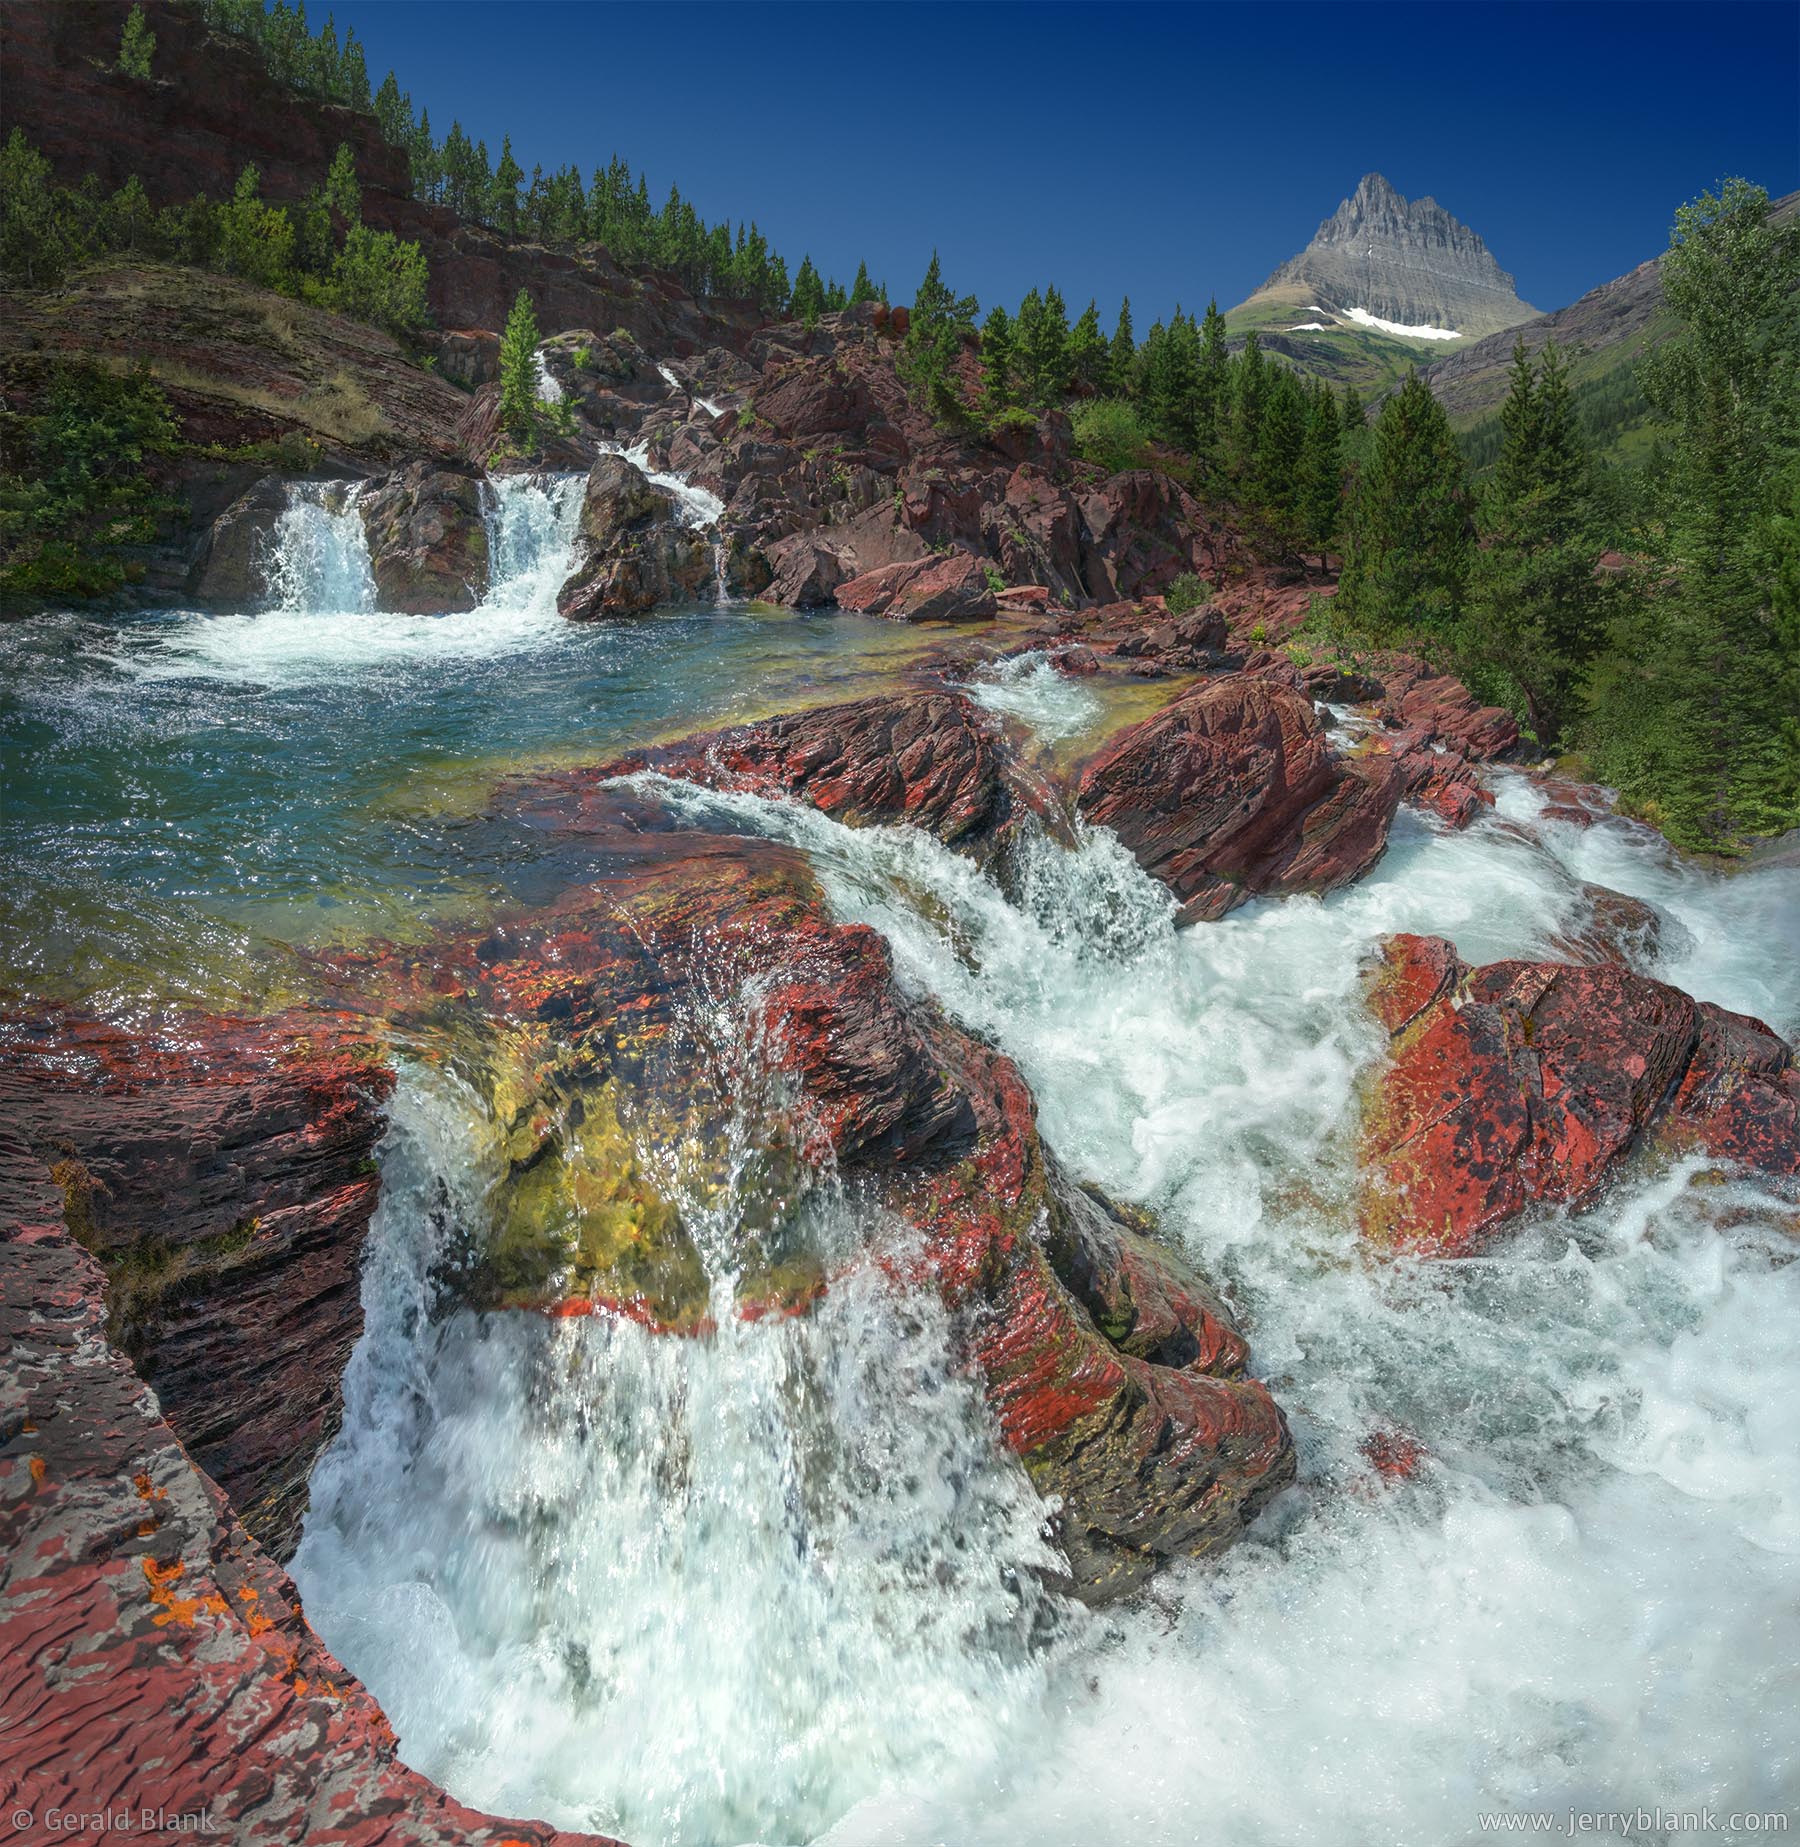 #68679 - Redrock Falls on Swiftcurrent Creek, Glacier National Park, Montana. Mount Wilbur is visible in the background. Photo by Jerry Blank.